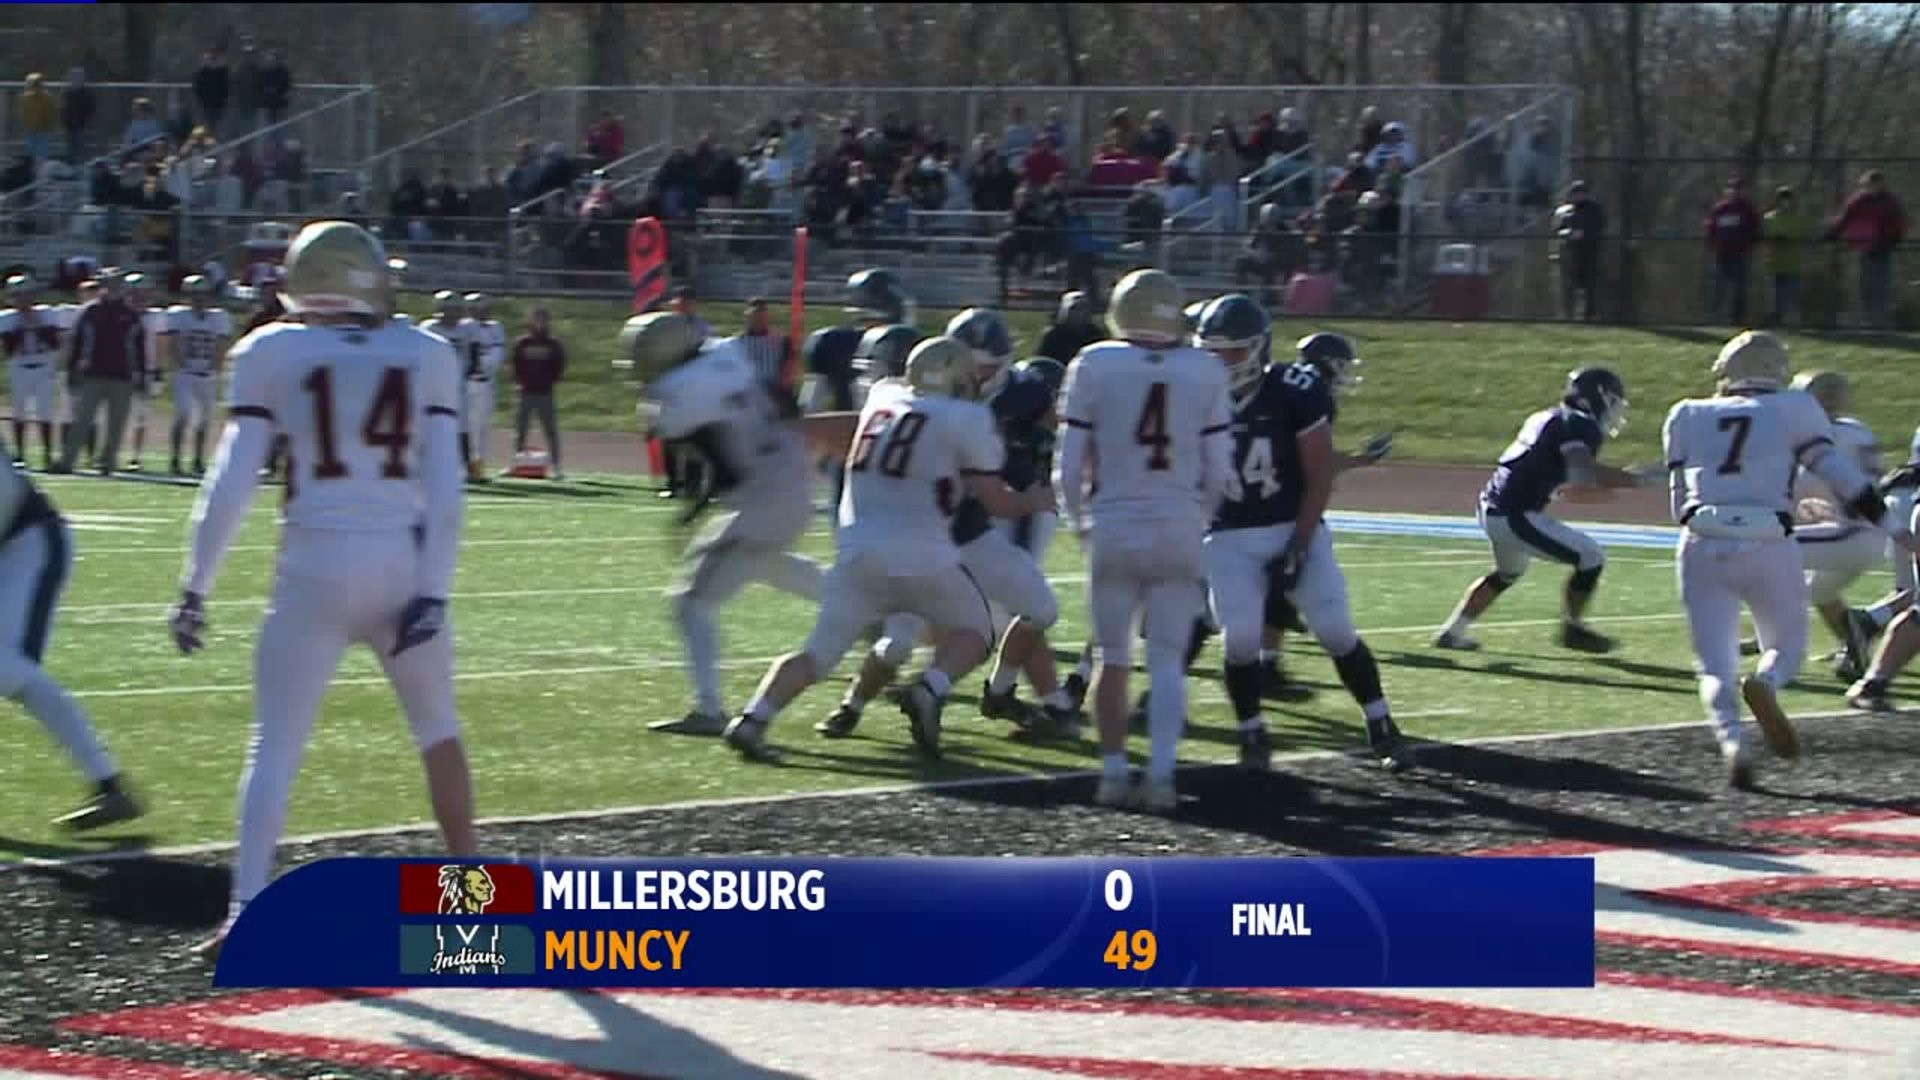 Muncy Tops Millersburg 49-0 for First State Win